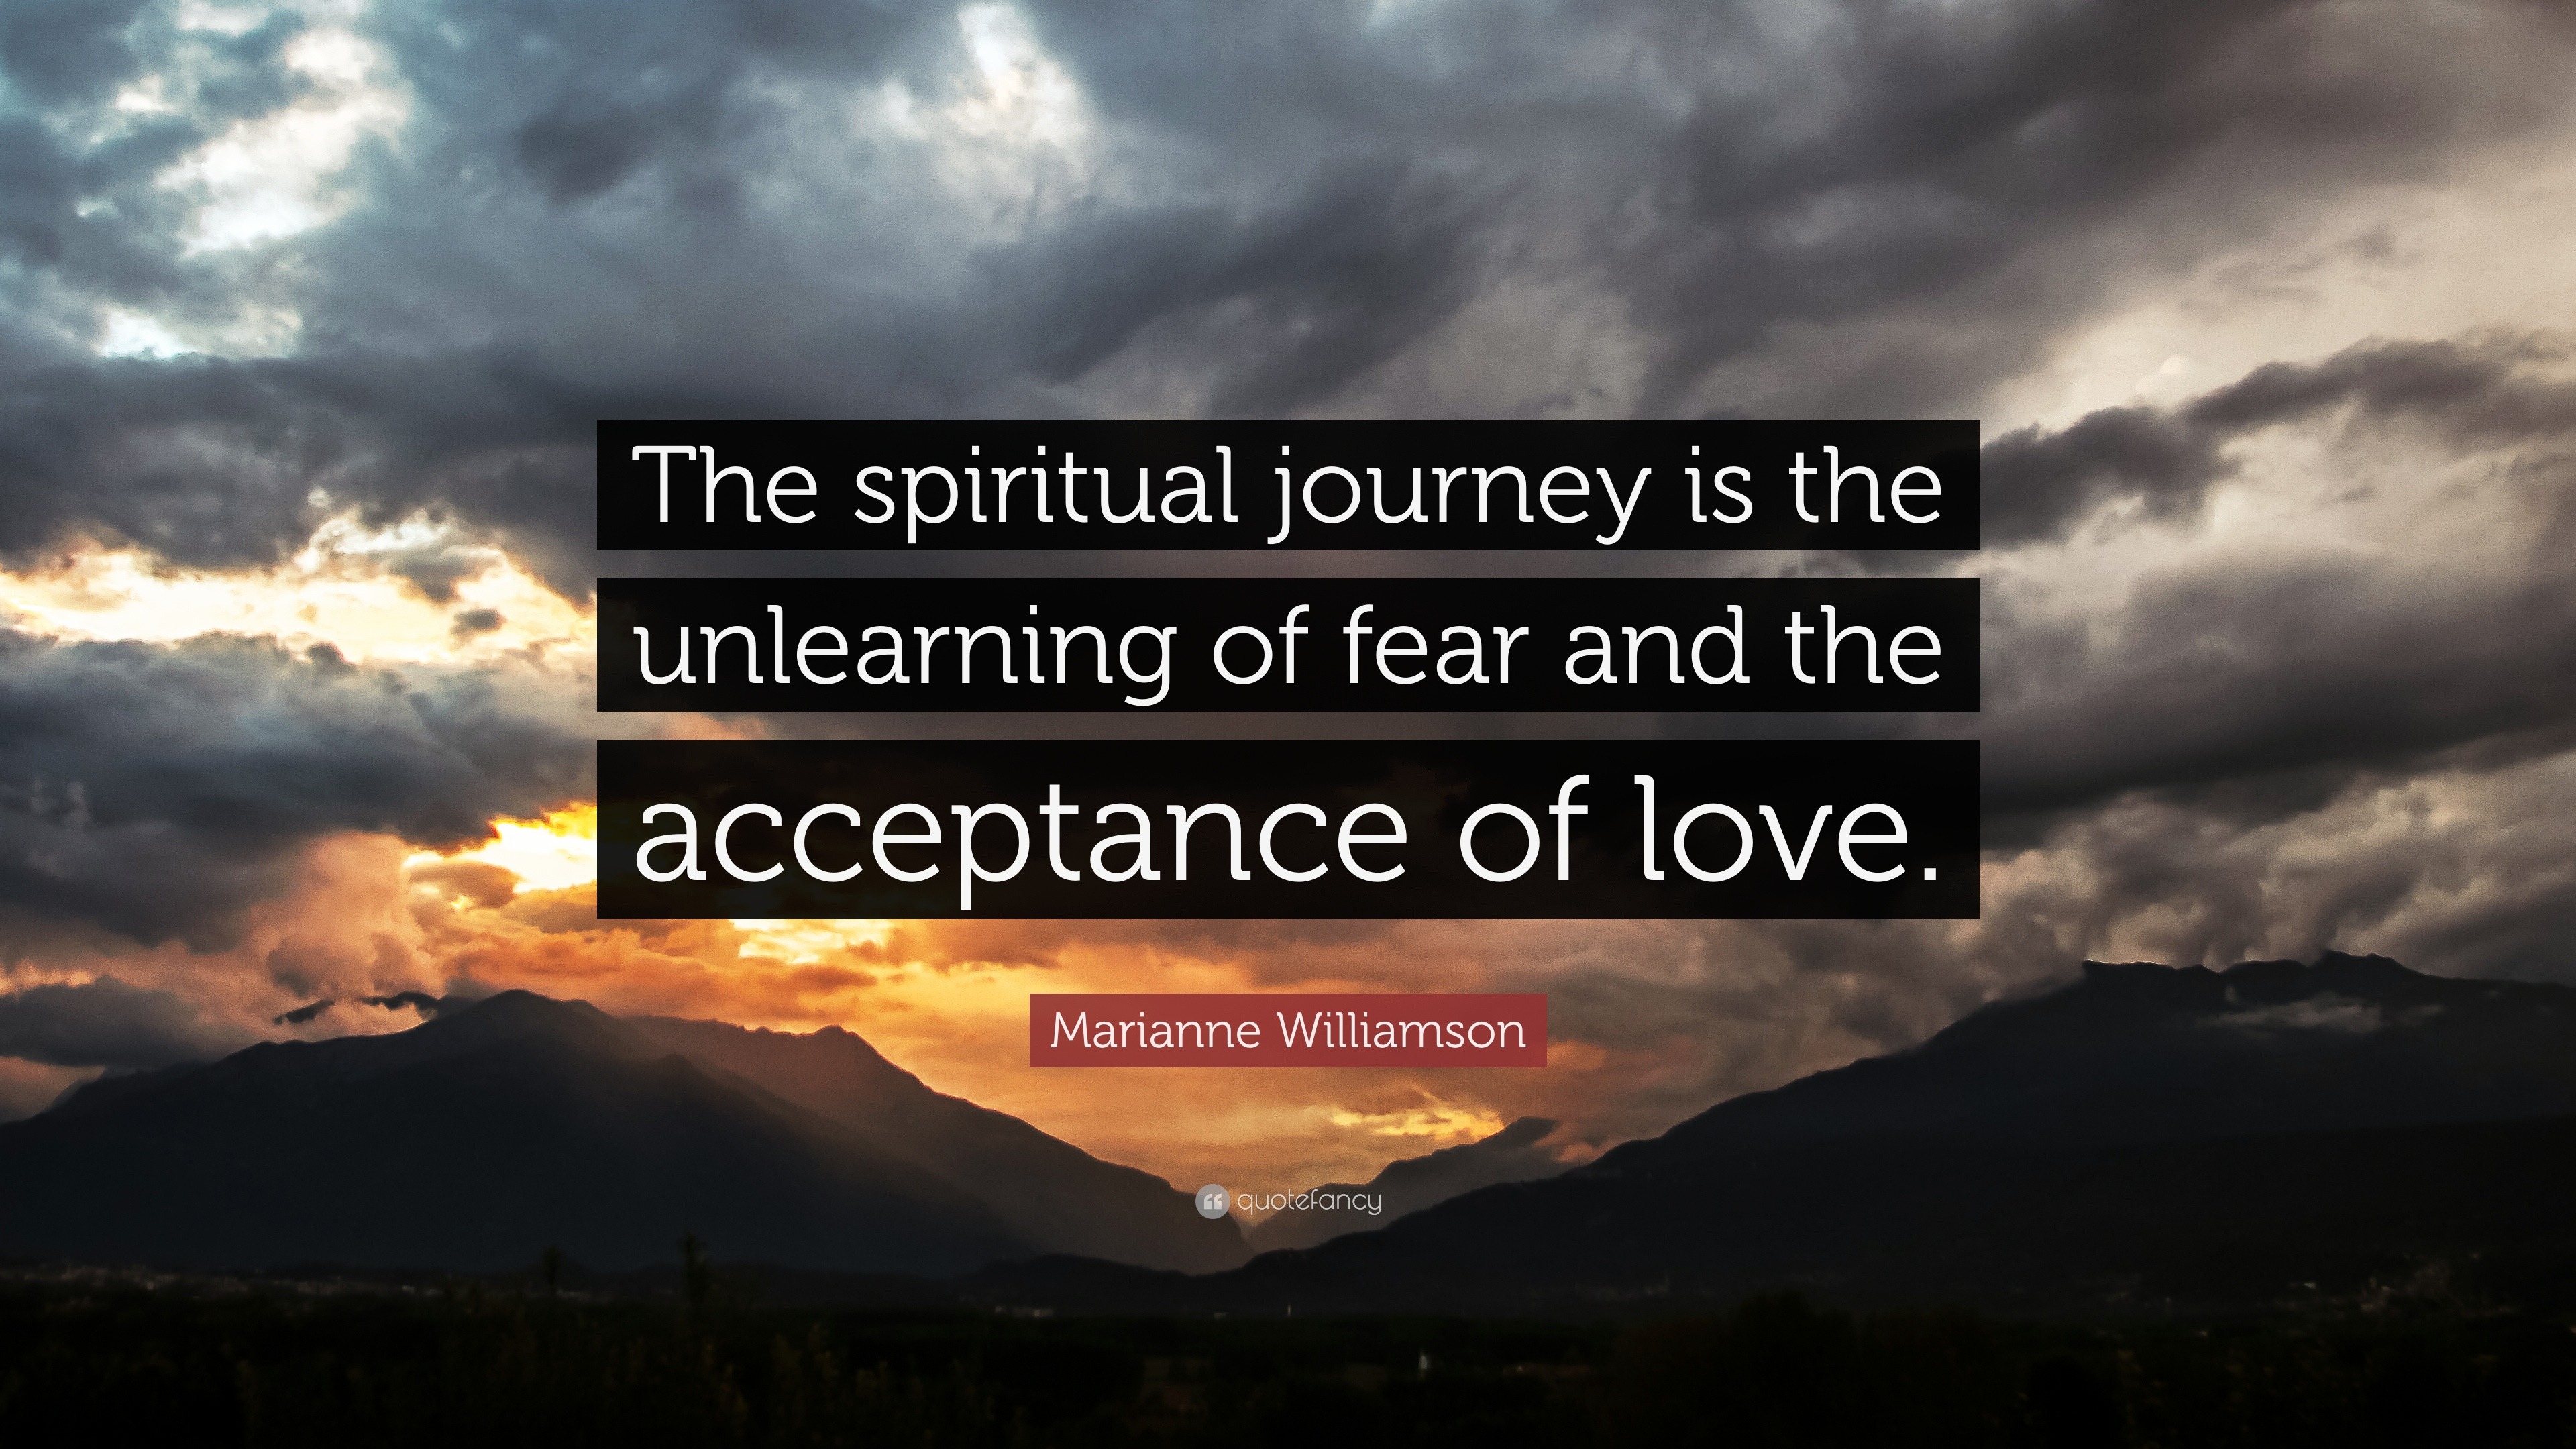 Marianne Williamson Quote: “The spiritual journey is the